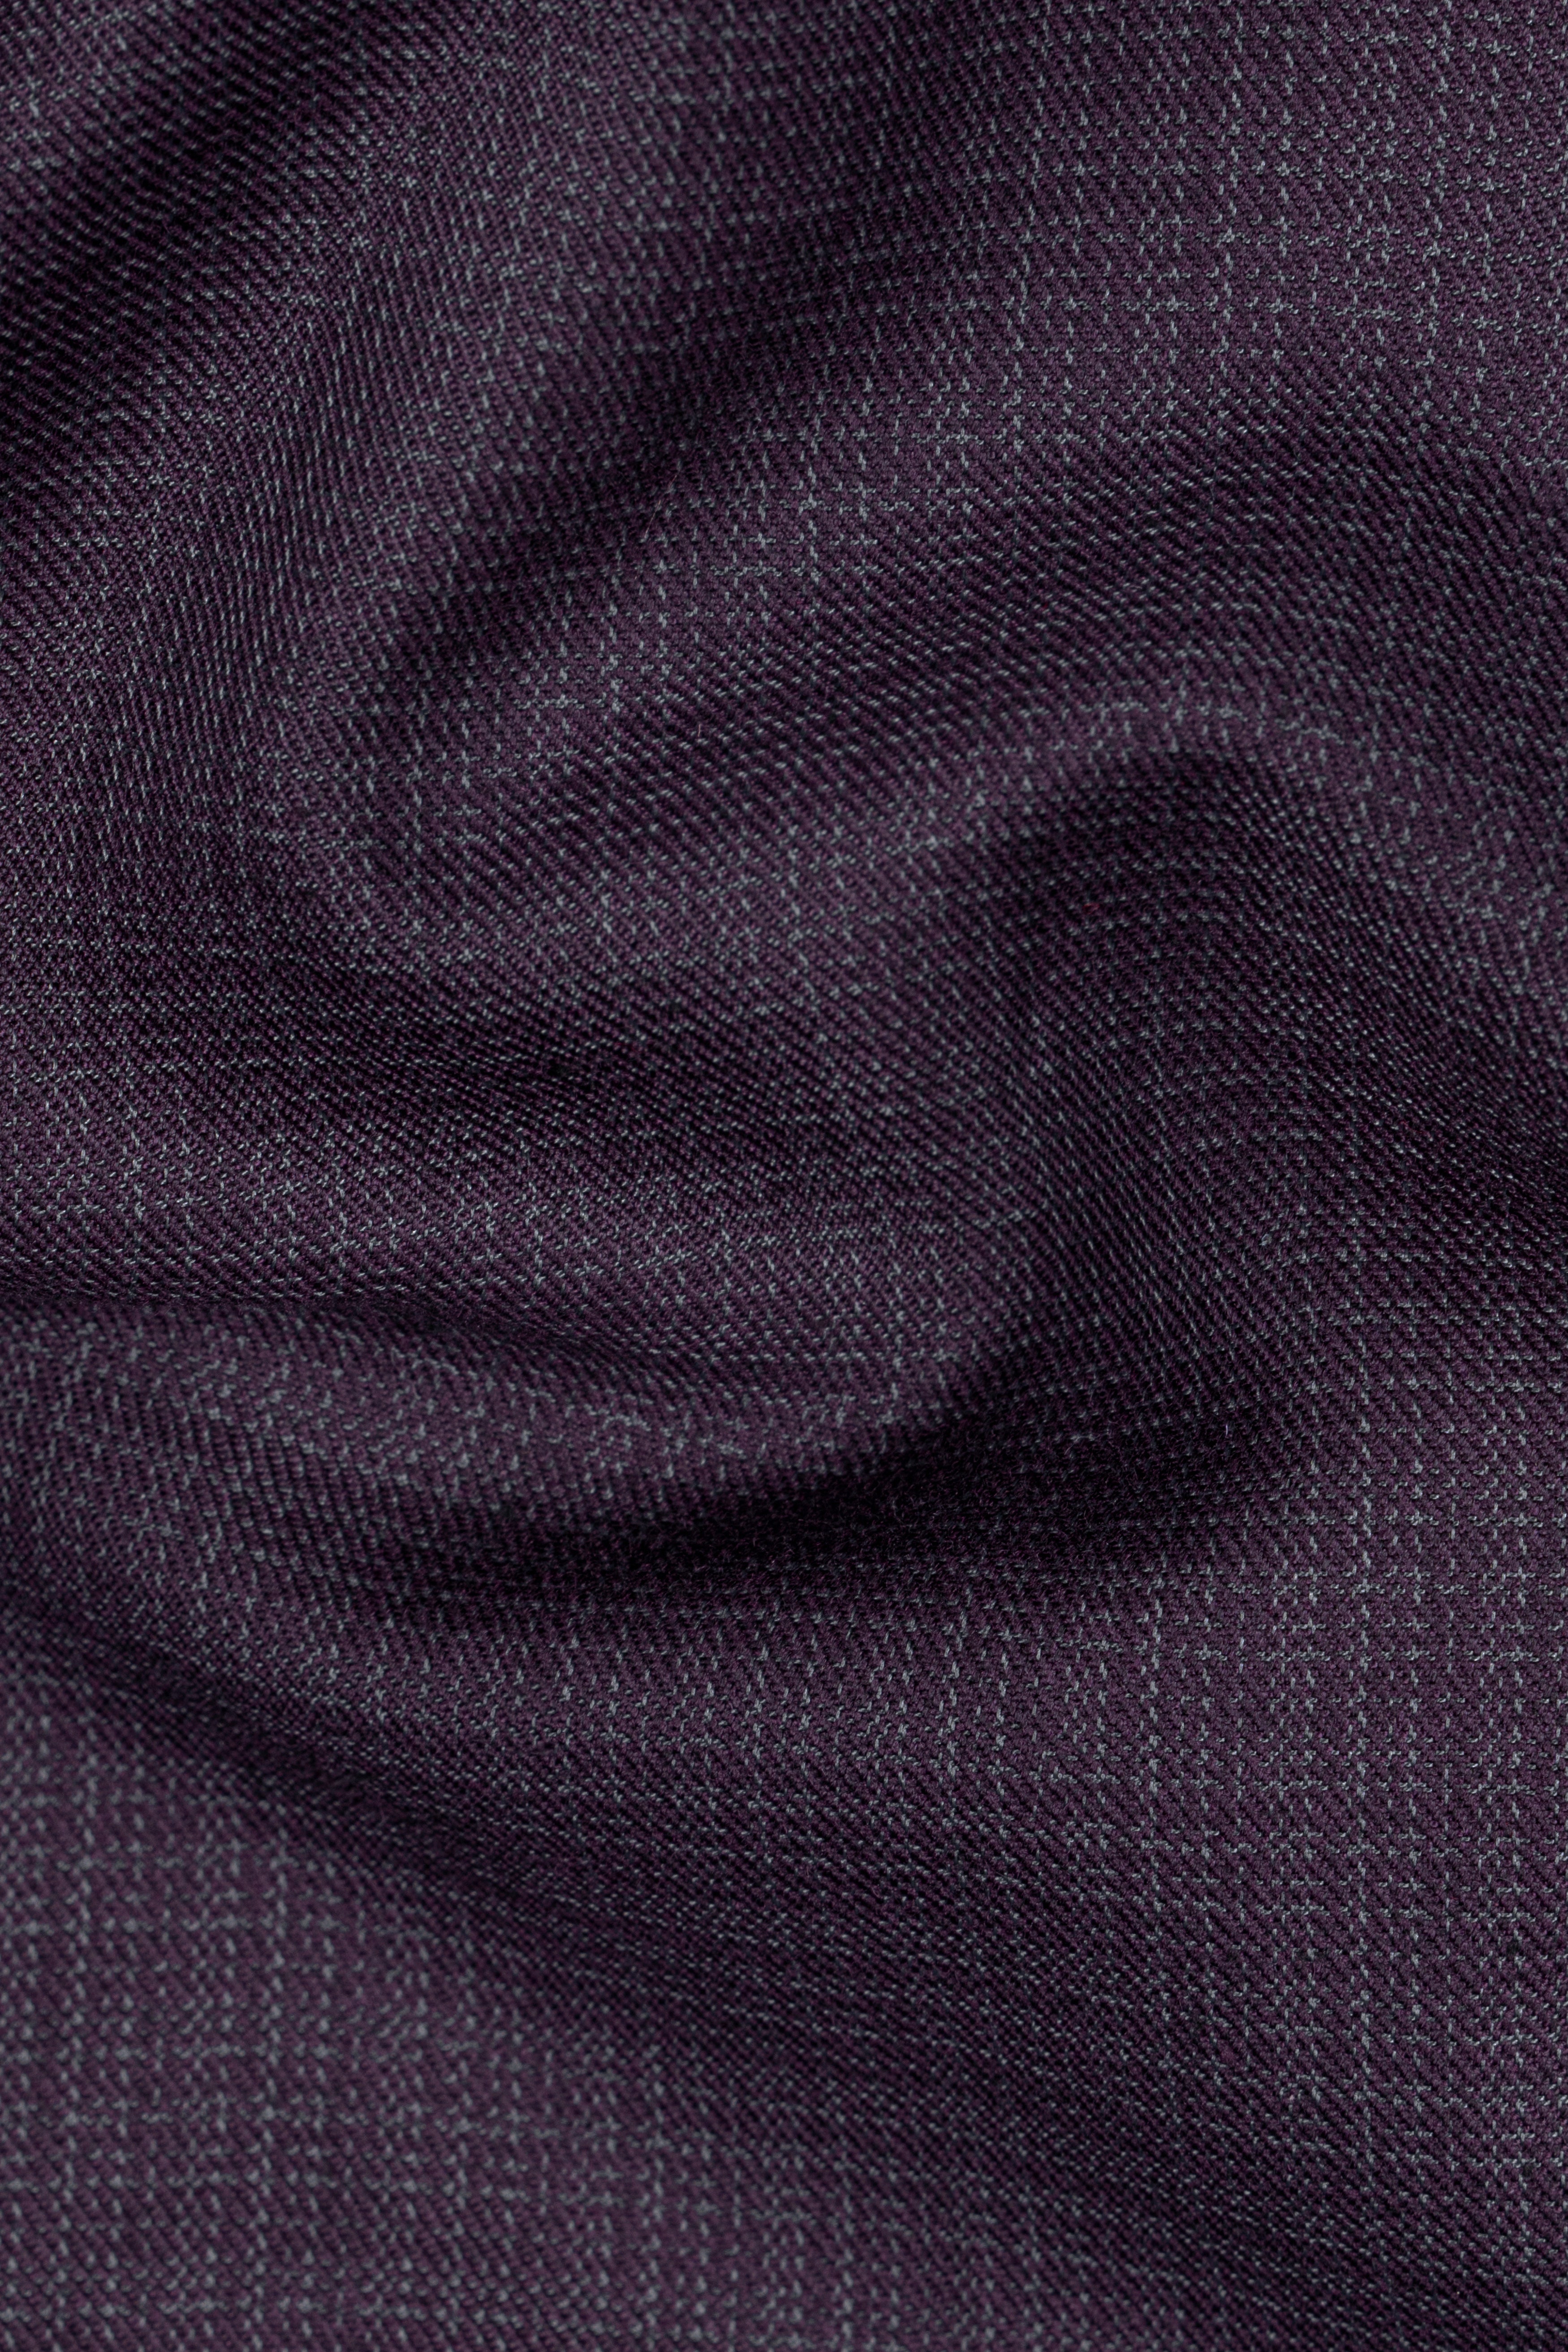 Blackcurrant Textured Wool Rich Bandhgala Suit